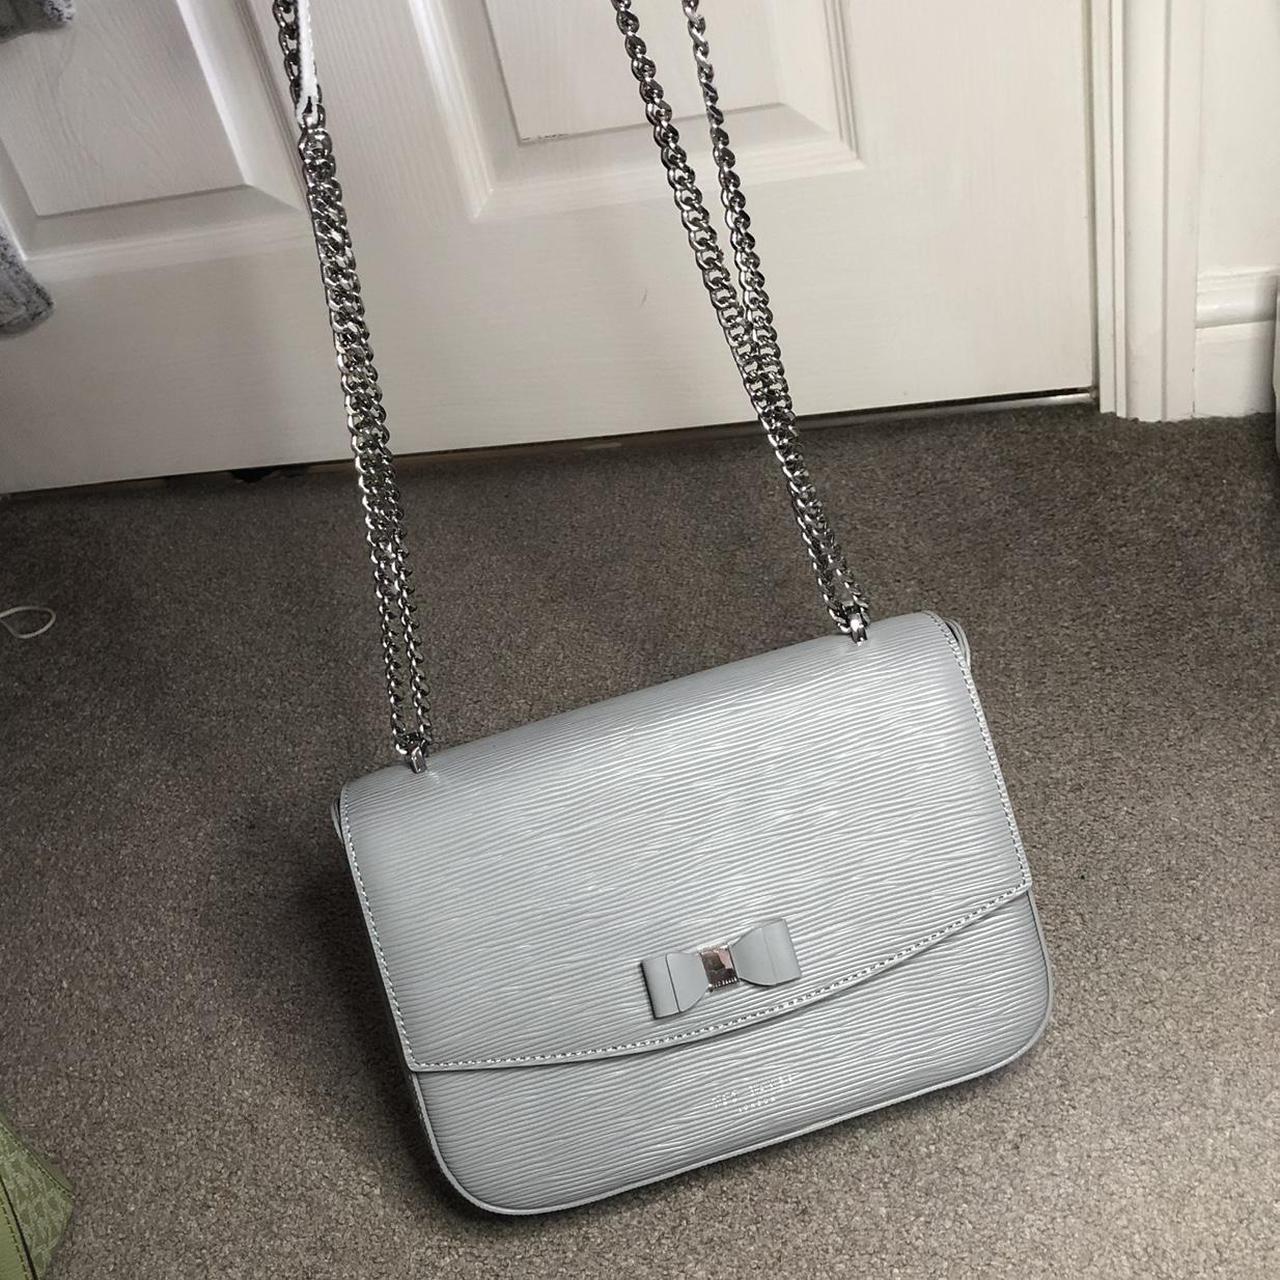 BNWT Ted Baker Wallace Silver Bow Leather Zip Arouind Matinee Purse | eBay